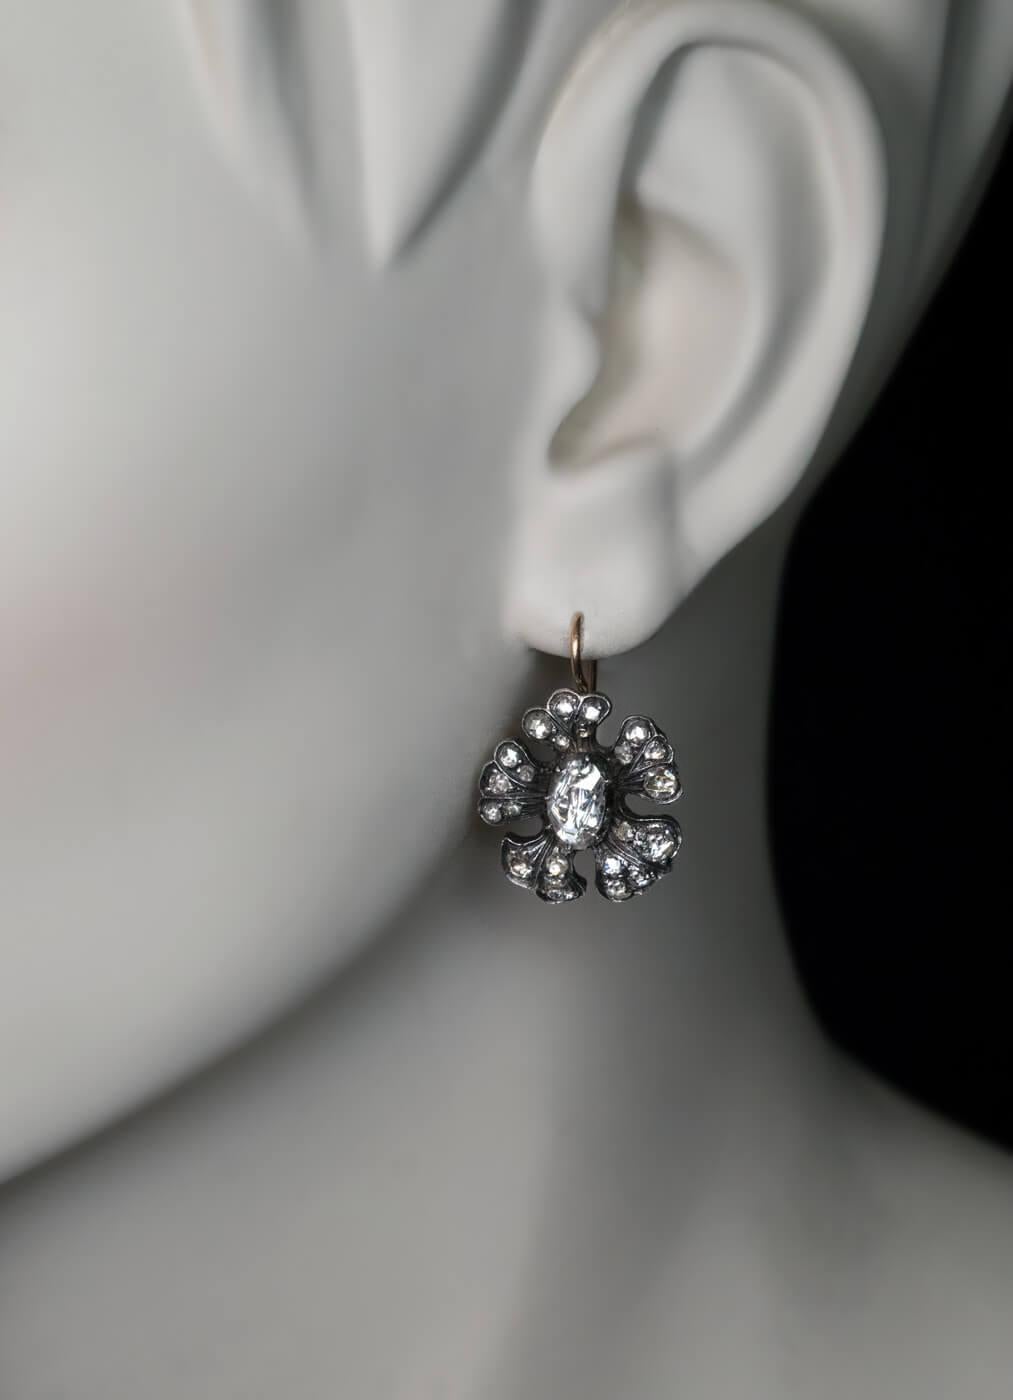 Circa 1860  The earrings are designed as stylized flower heads embellished with antique rose cut diamonds of various shapes and sizes (H-I-J color, VS-SI clarity). They are crafted in silver-topped 14K gold (front – silver, back – gold).  Total